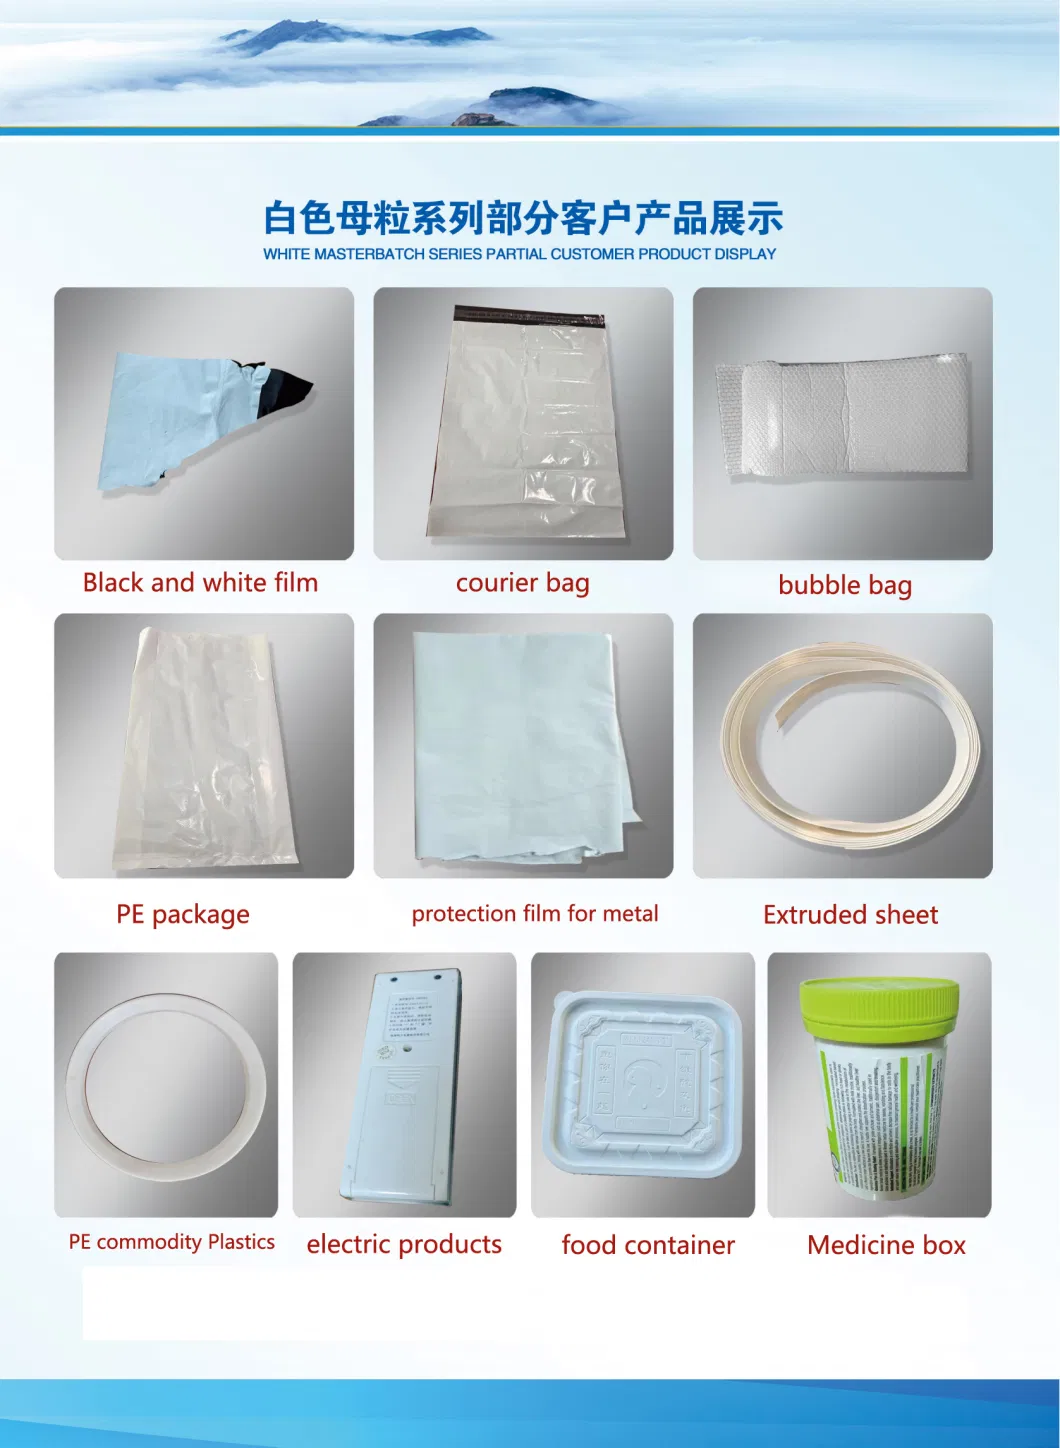 Plastic Material White Master Batch for Film and Shopping Bags